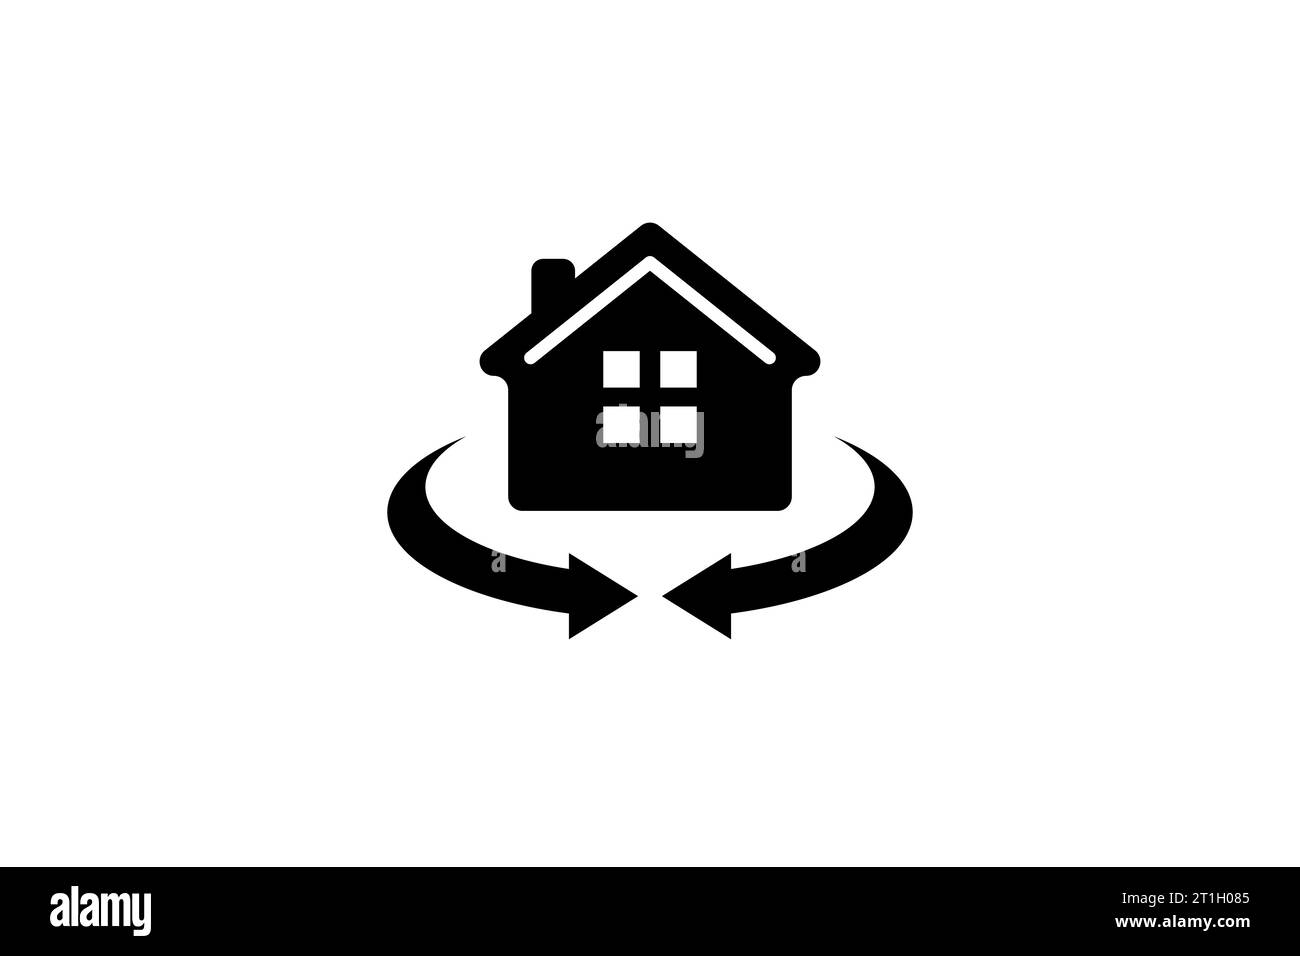 House with rotation arrow icon symbol design. 360 degree full view concept design Stock Vector